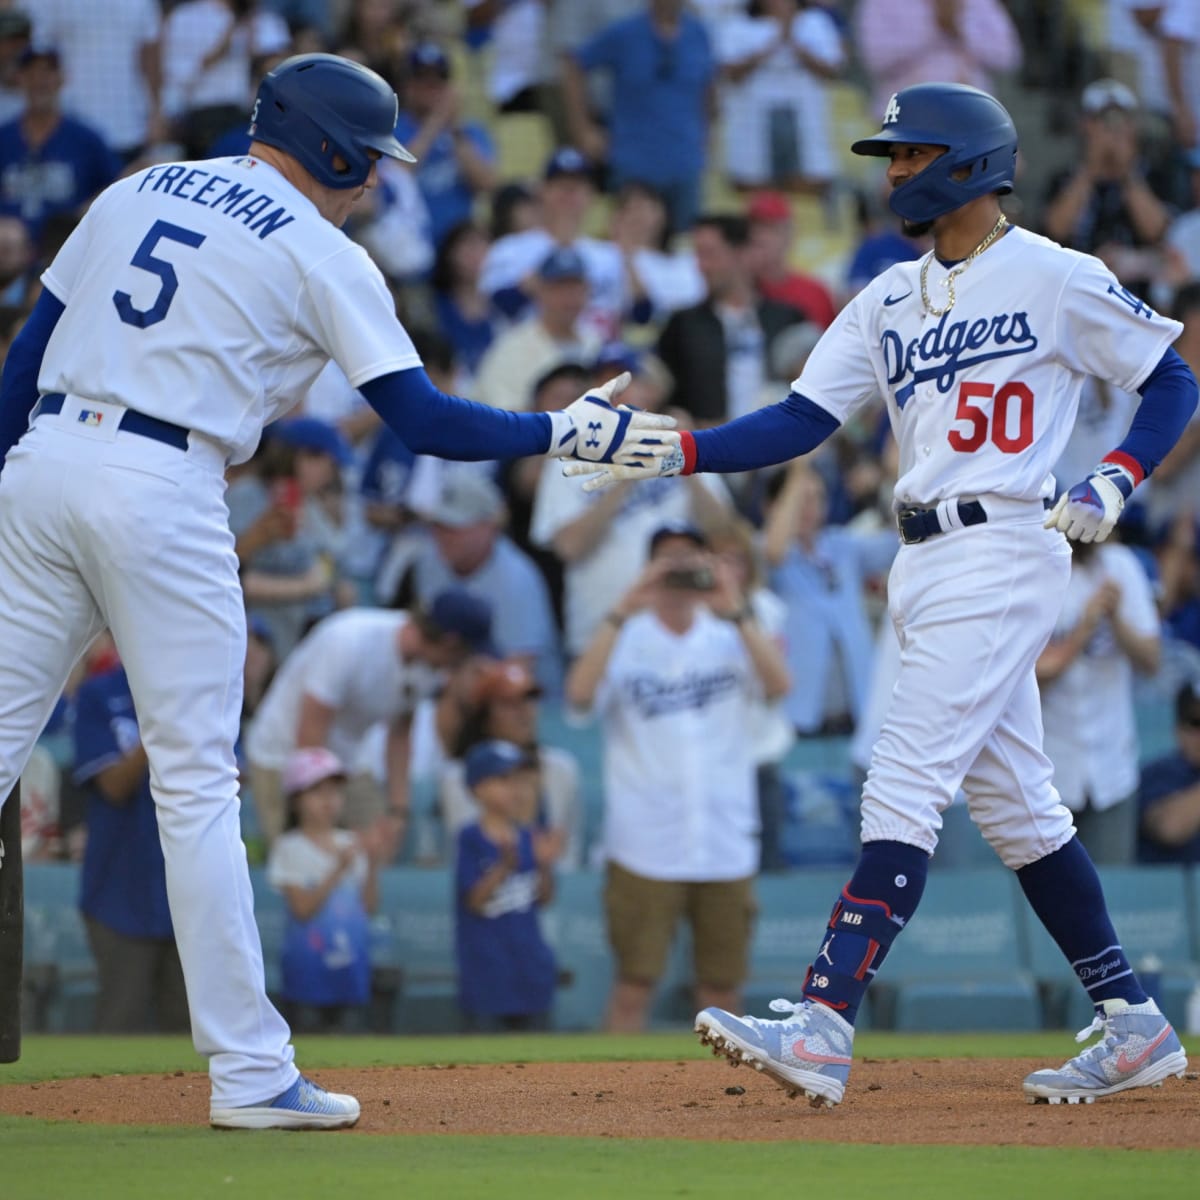 3 Dodgers Among Top-Selling Jerseys in MLB This Season - Inside the Dodgers